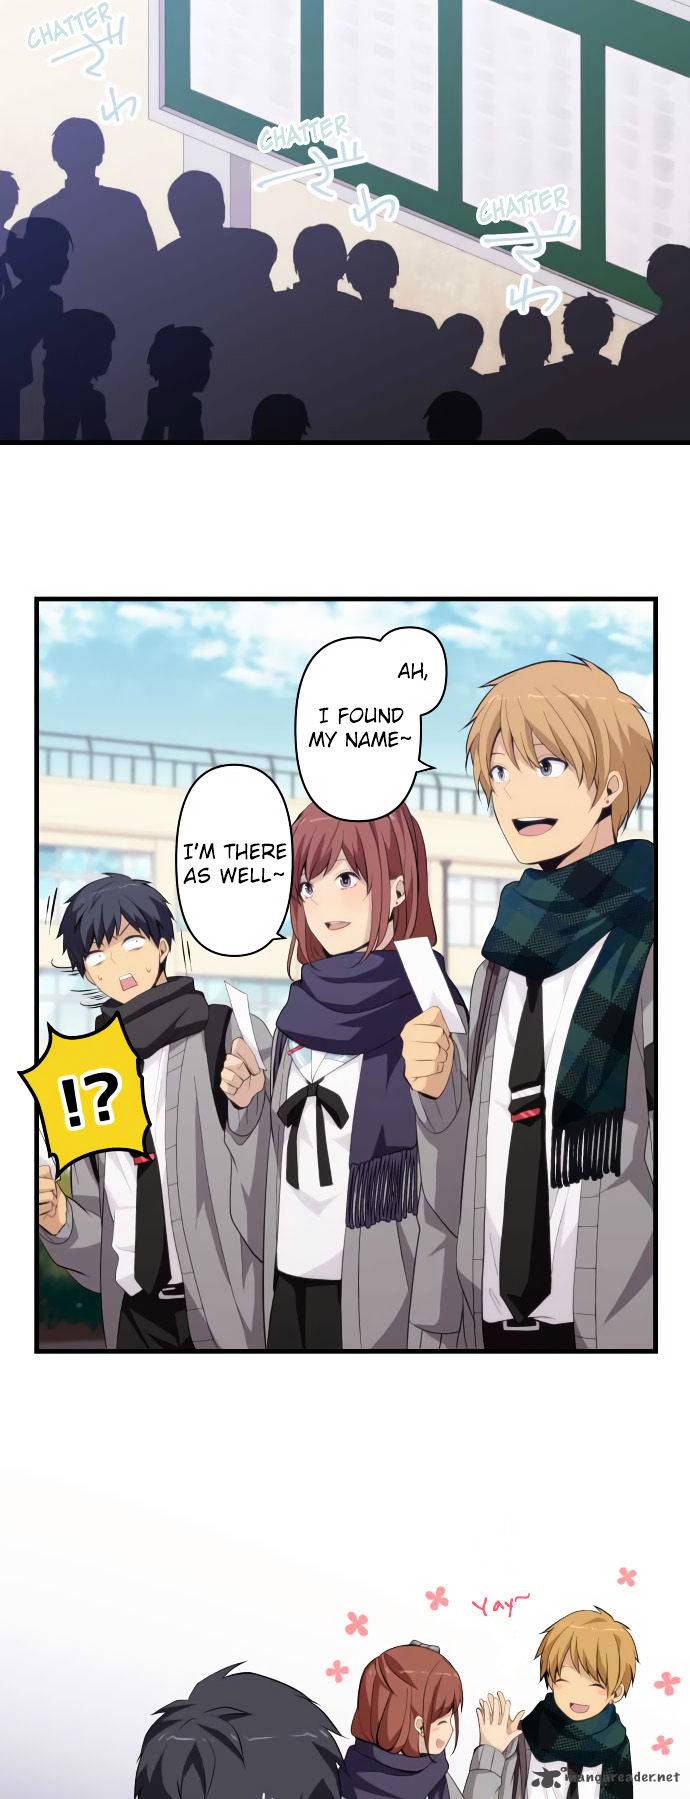 Relife 206 5